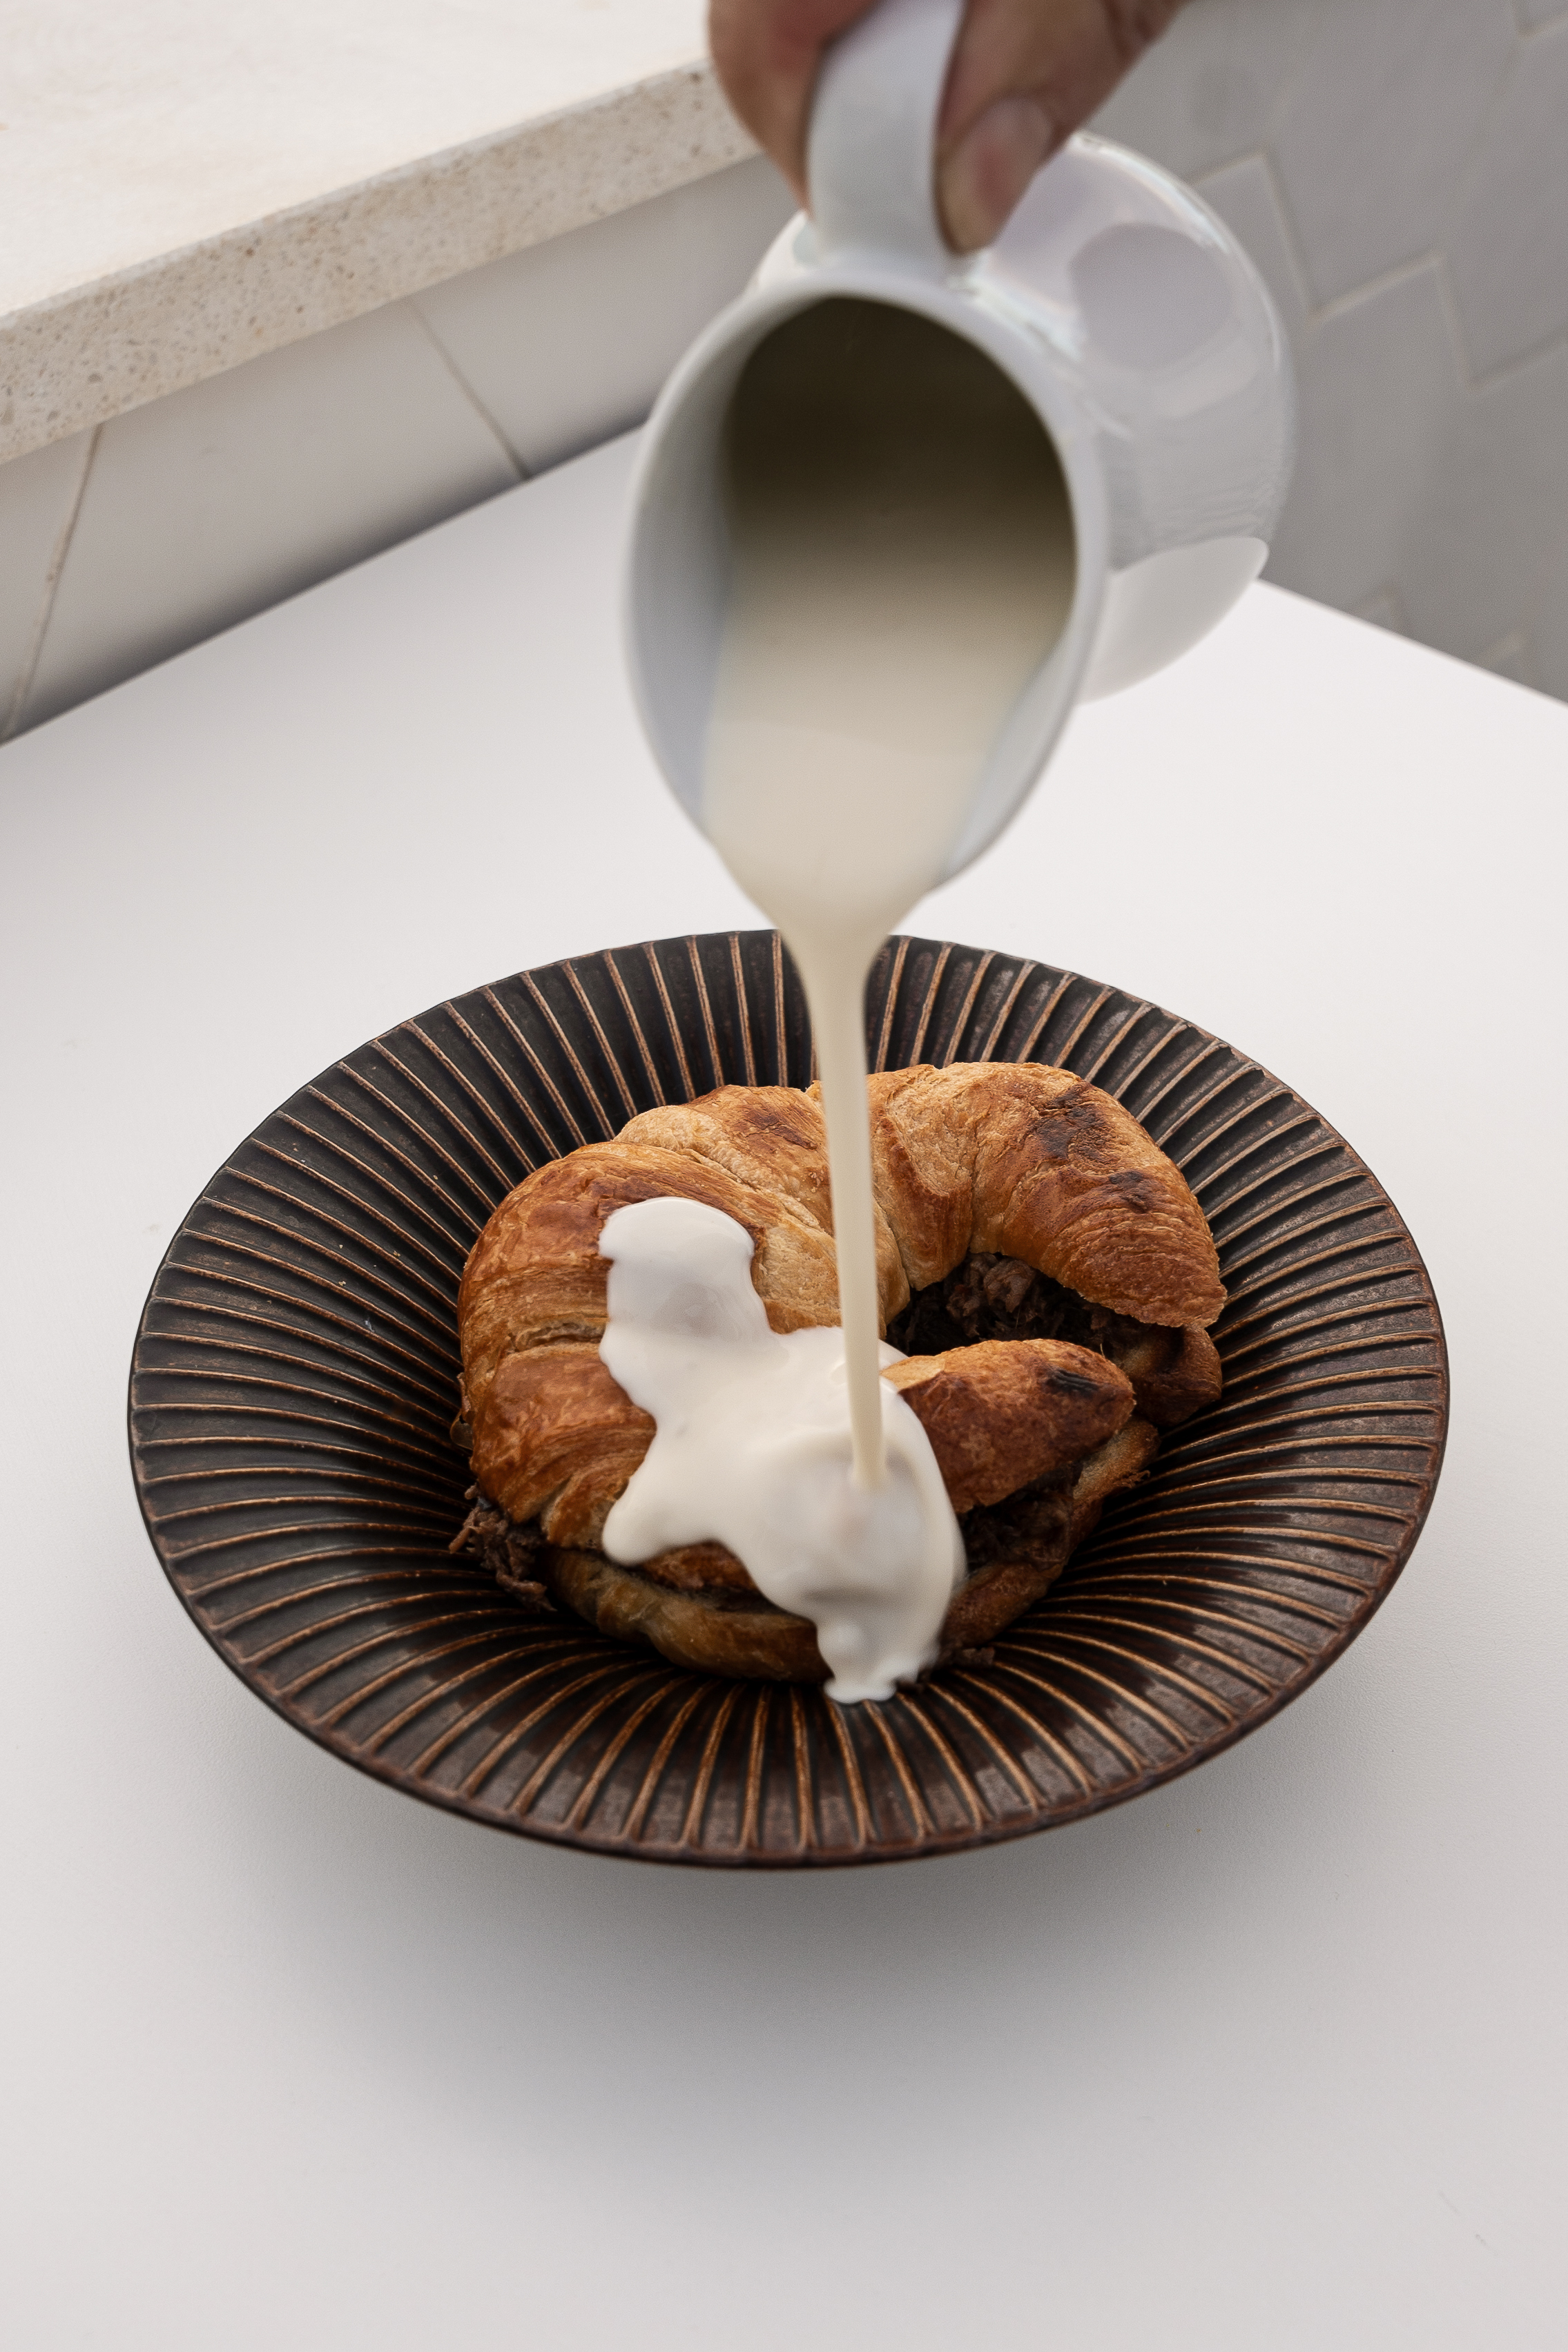 Oxtail croissant glazed with parmesan veloute